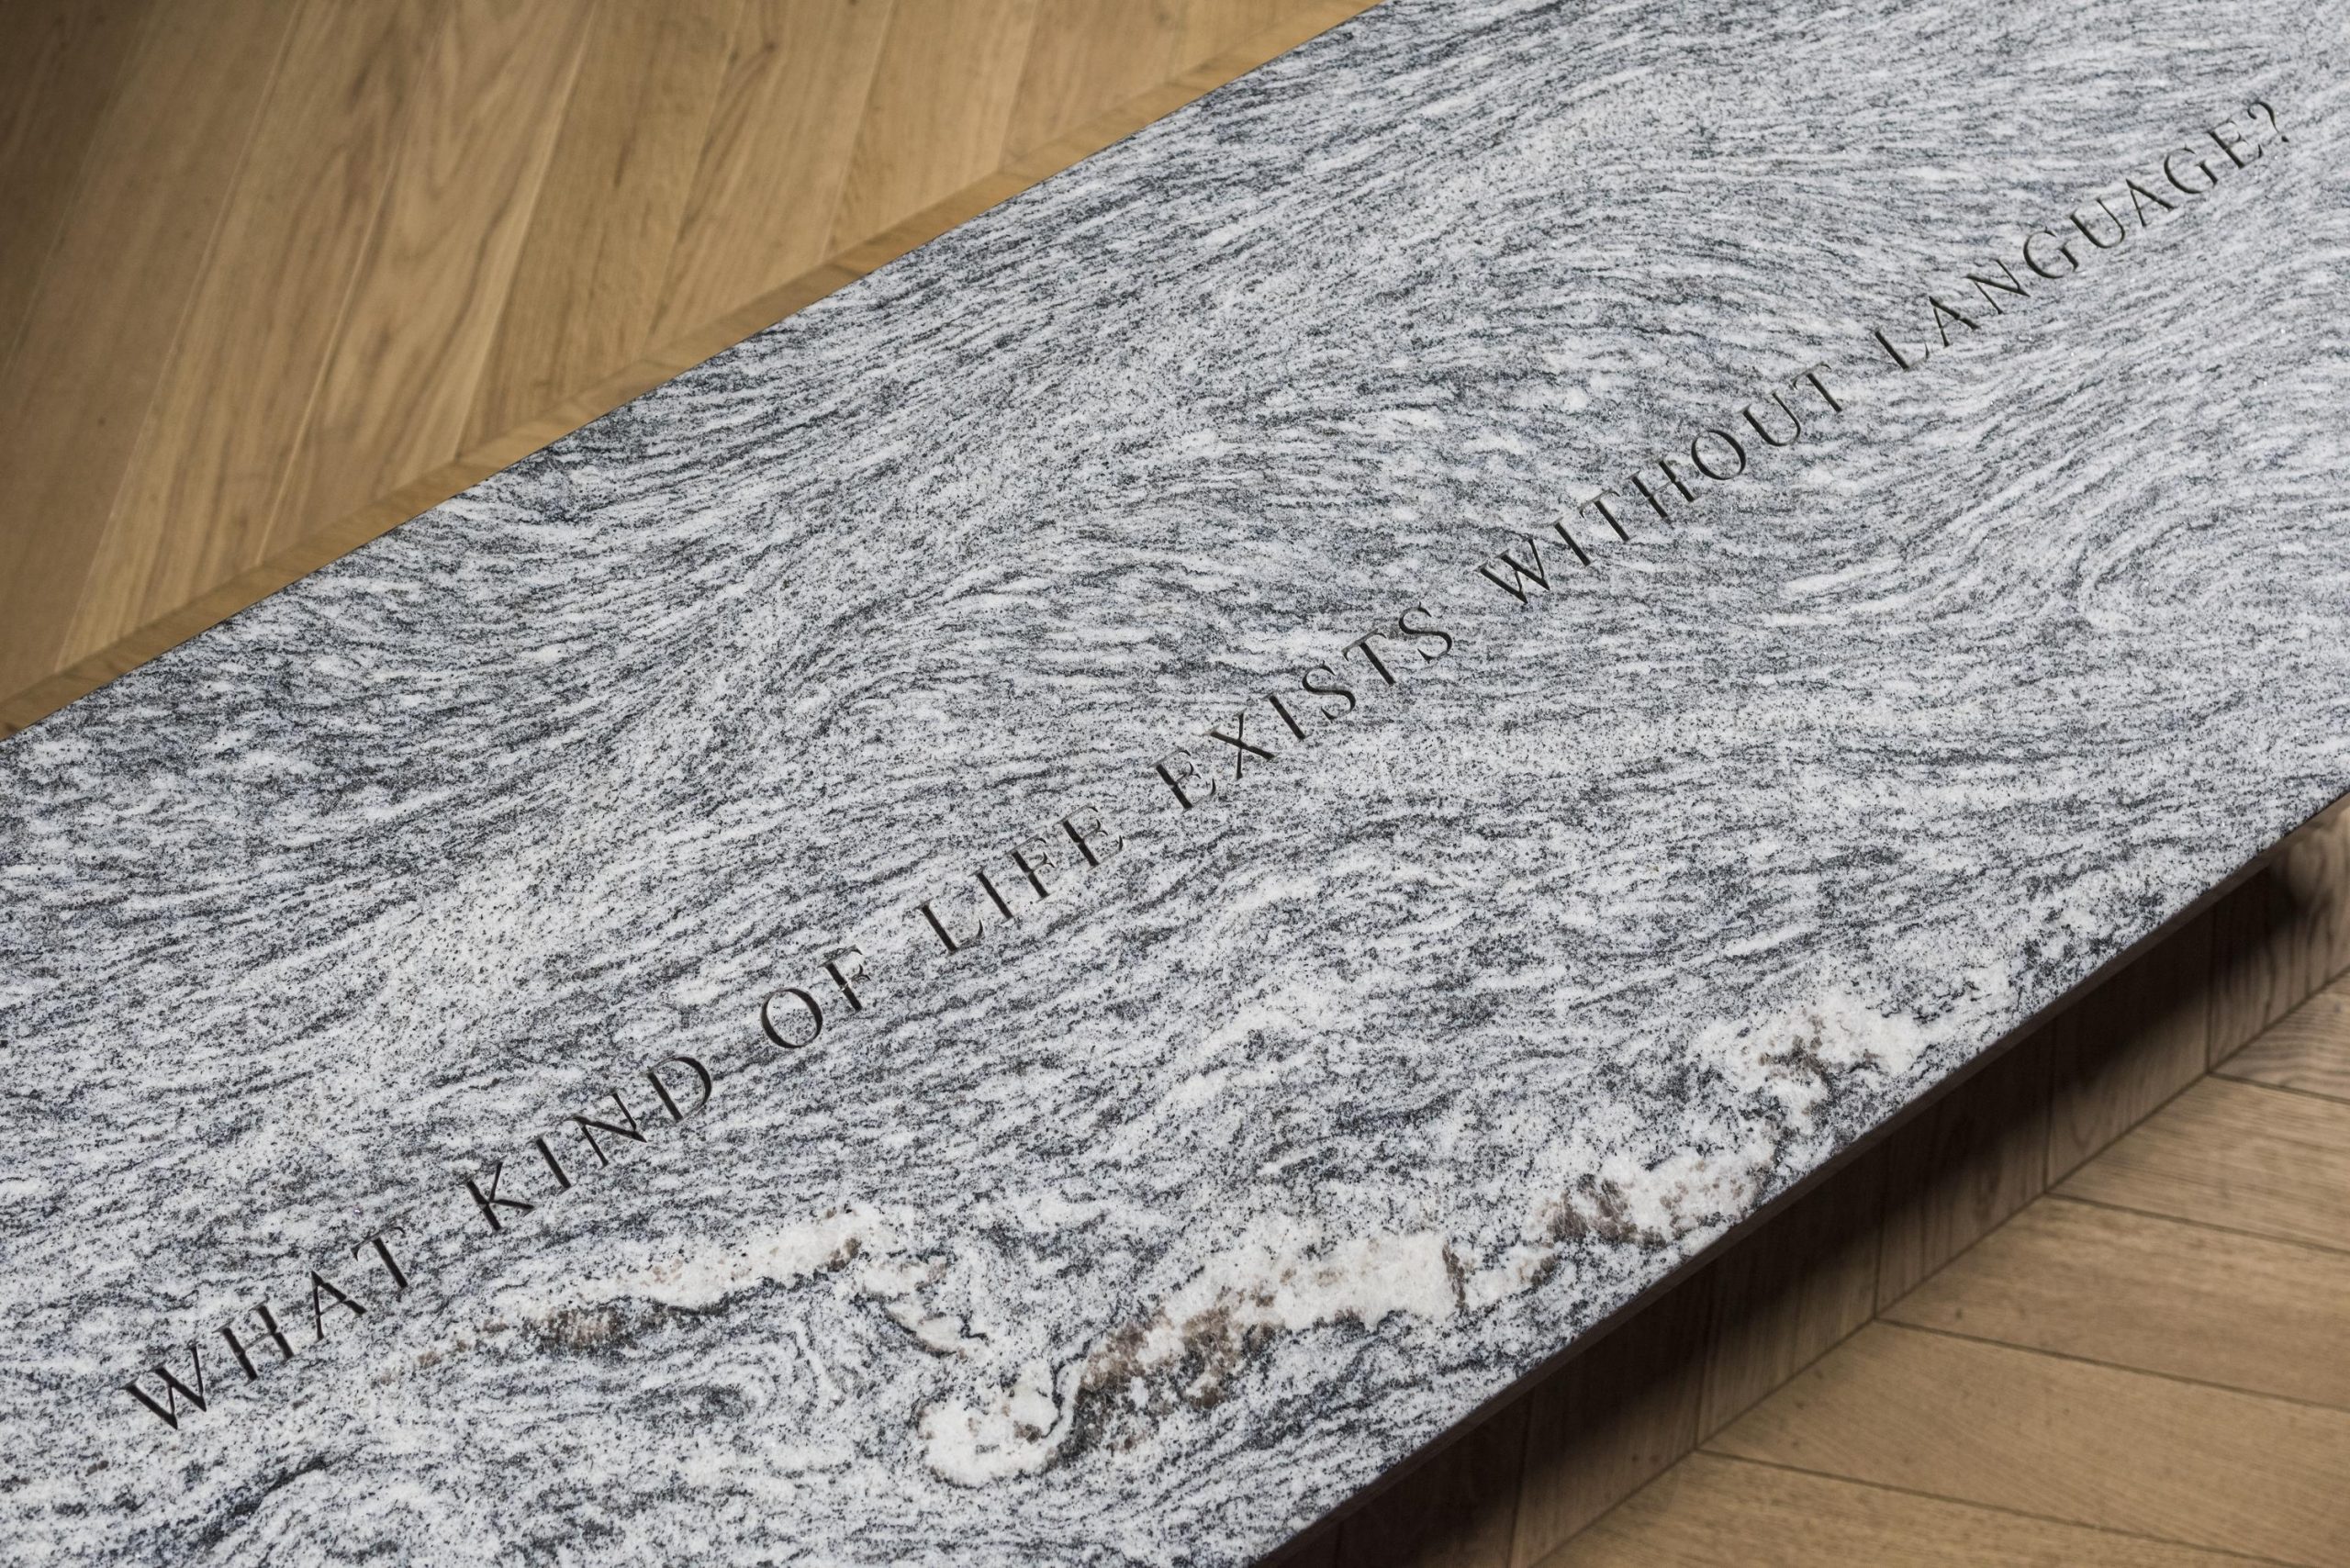 Grey bench with engraving of "what kind of life exists without language?" on the top